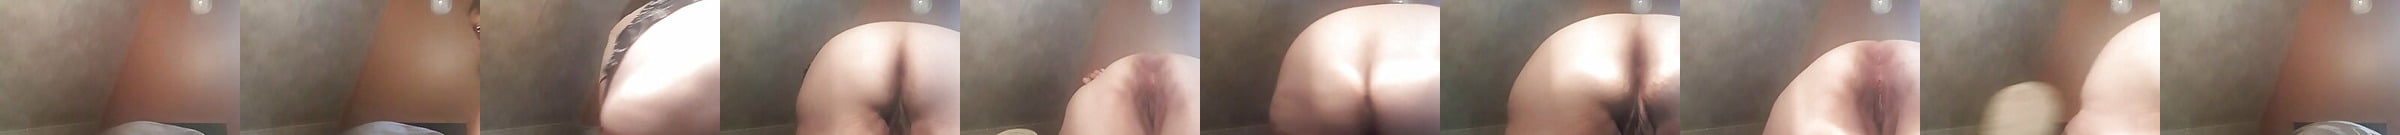 Featured Show Daddy Porn Videos Xhamster